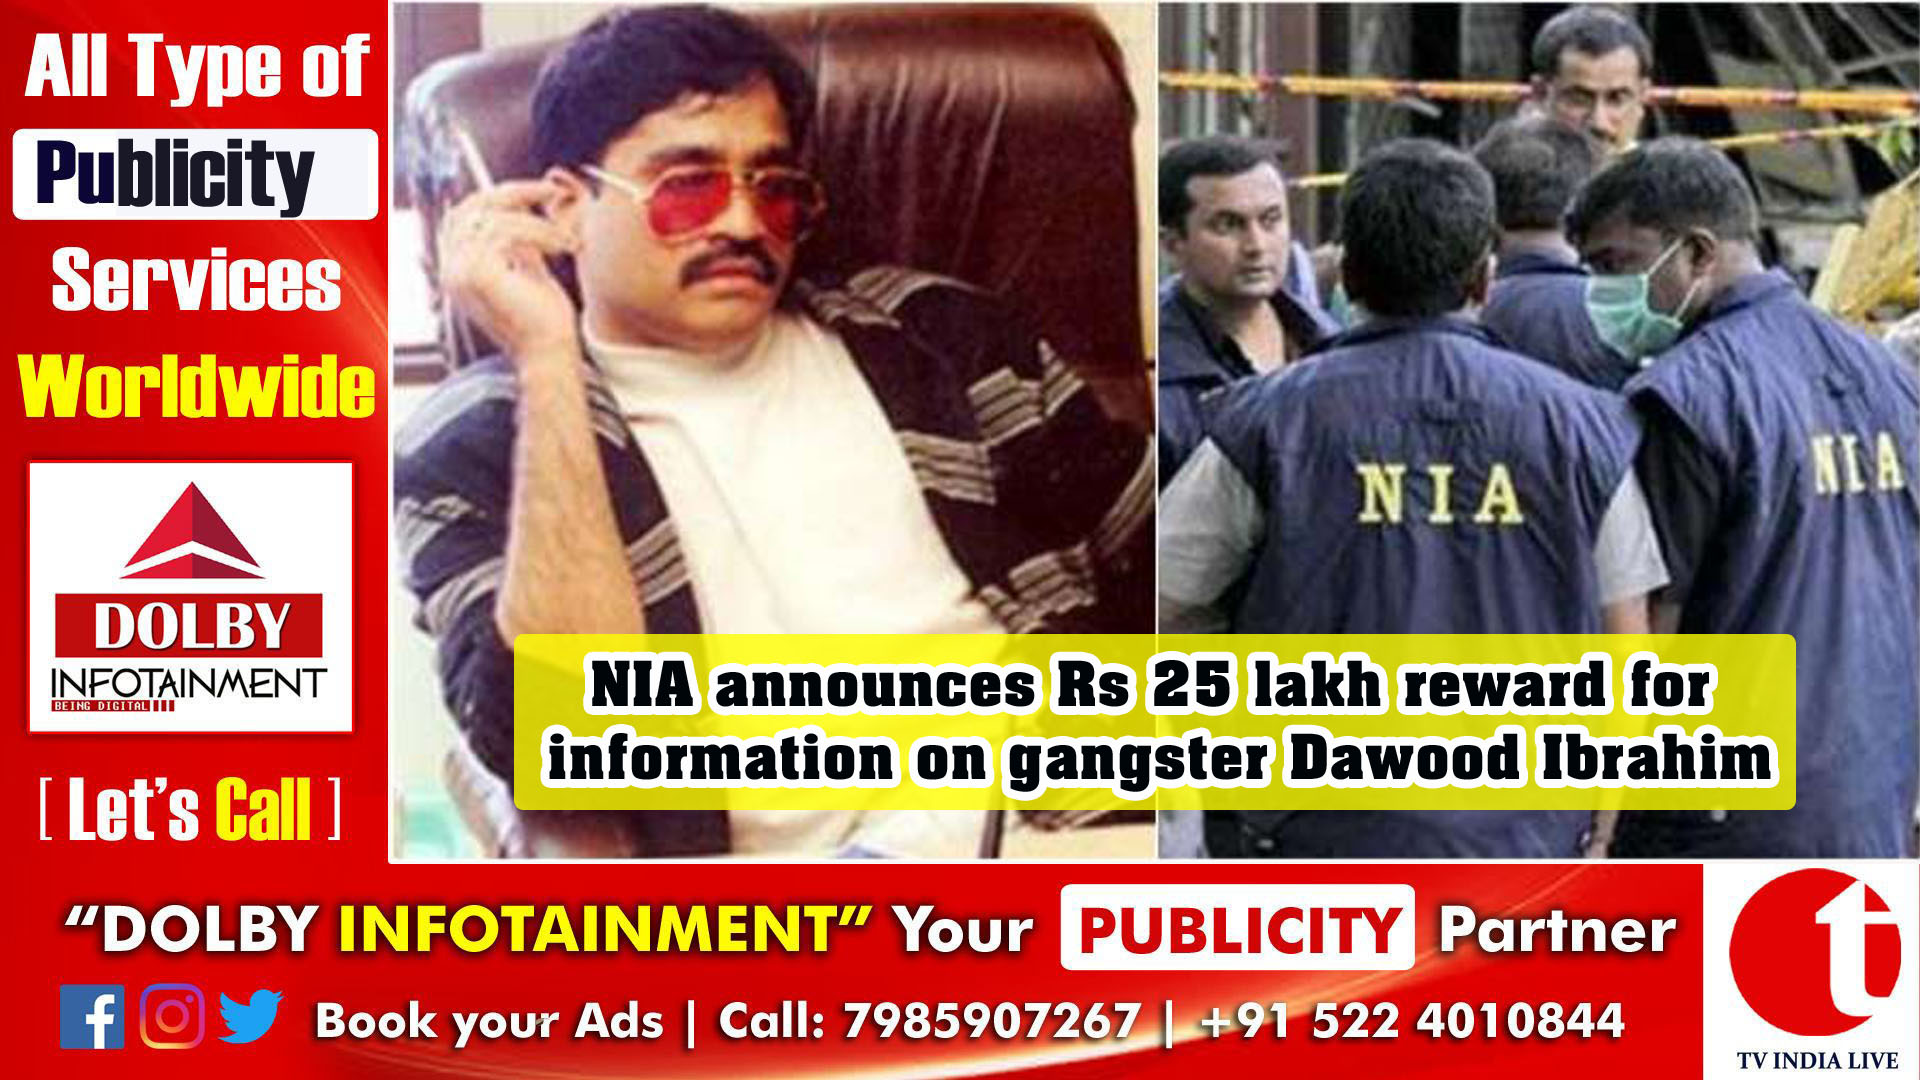 NIA announces Rs 25 lakh reward for information on gangster Dawood Ibrahim